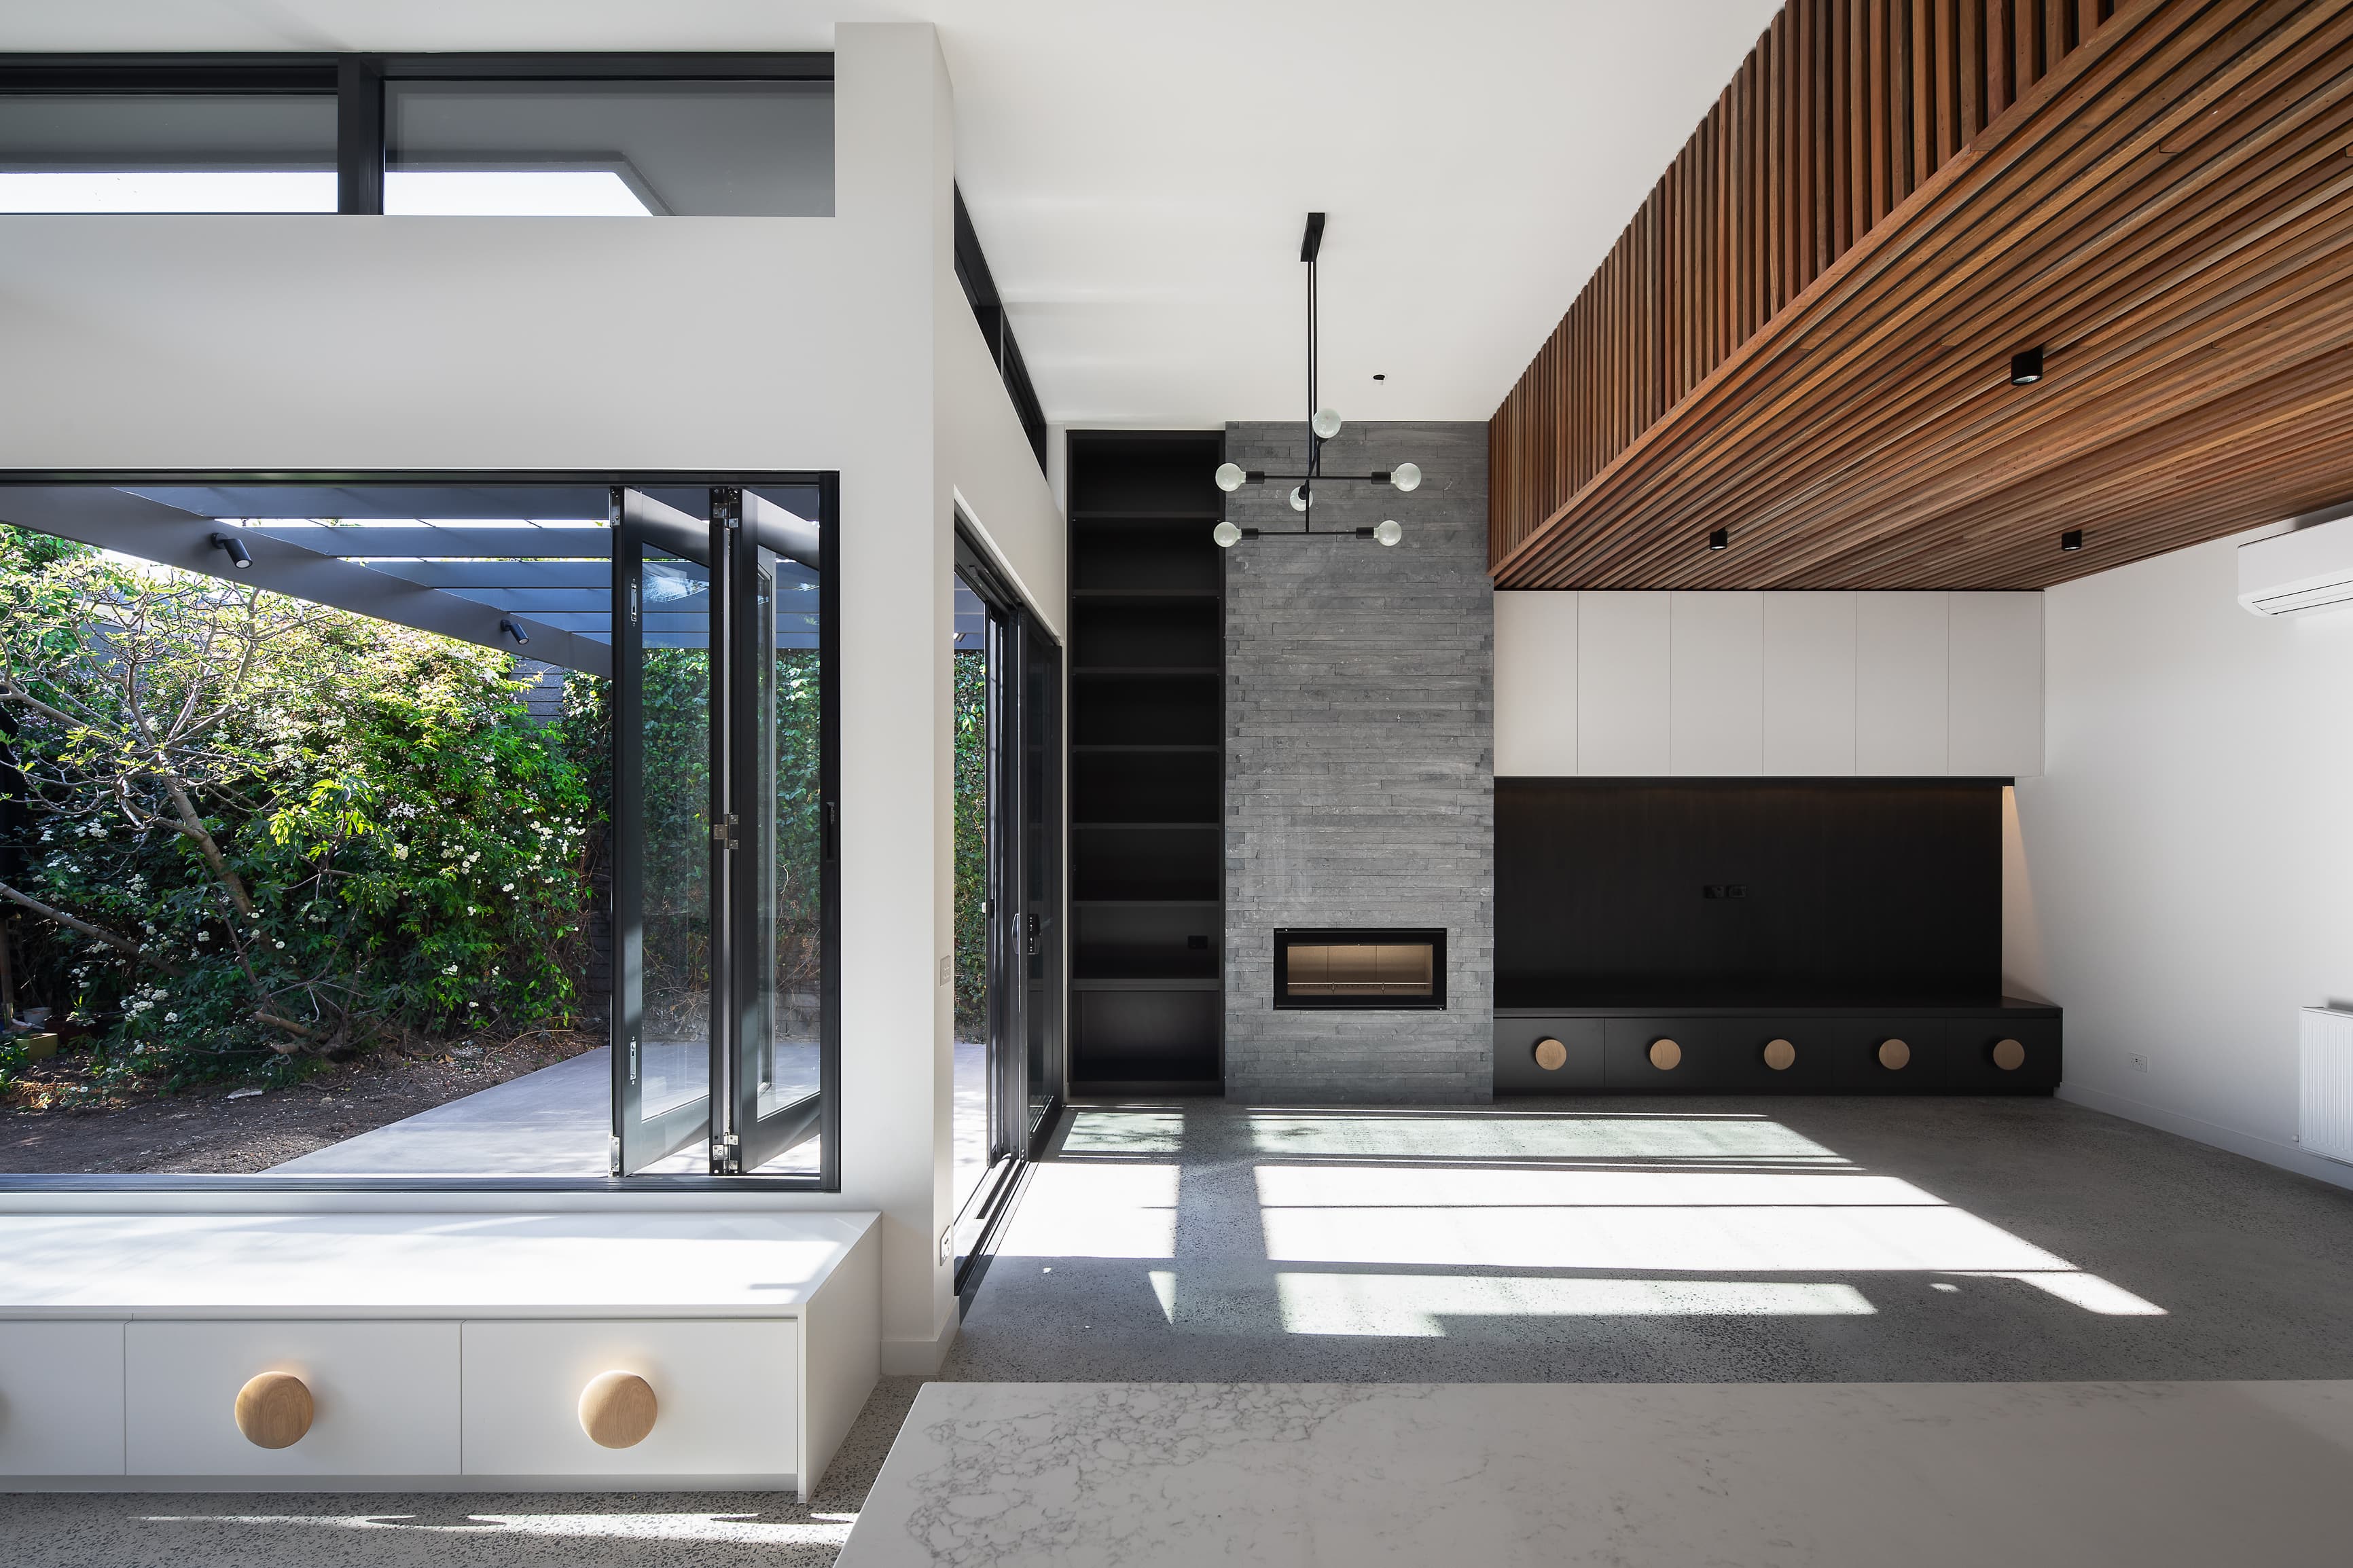 Our Architecture and Interior Design Projects - image Quadrant-Design-architects-31-Gray-St-Cliffton-Hill-8 on https://www.quadrantdesign.com.au